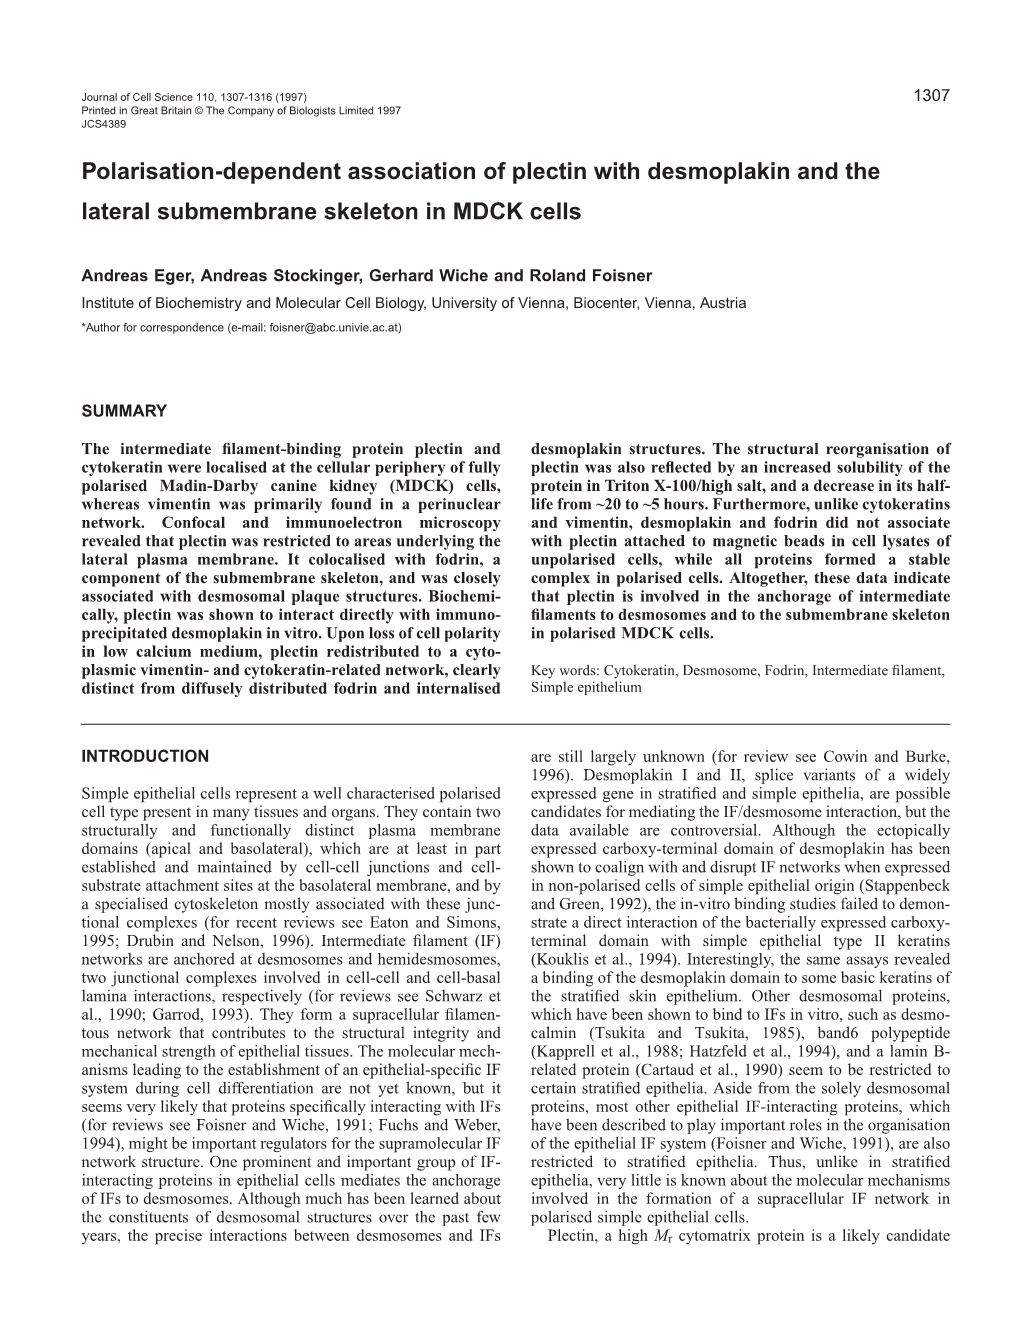 Polarisation-Dependent Association of Plectin with Desmoplakin and the Lateral Submembrane Skeleton in MDCK Cells